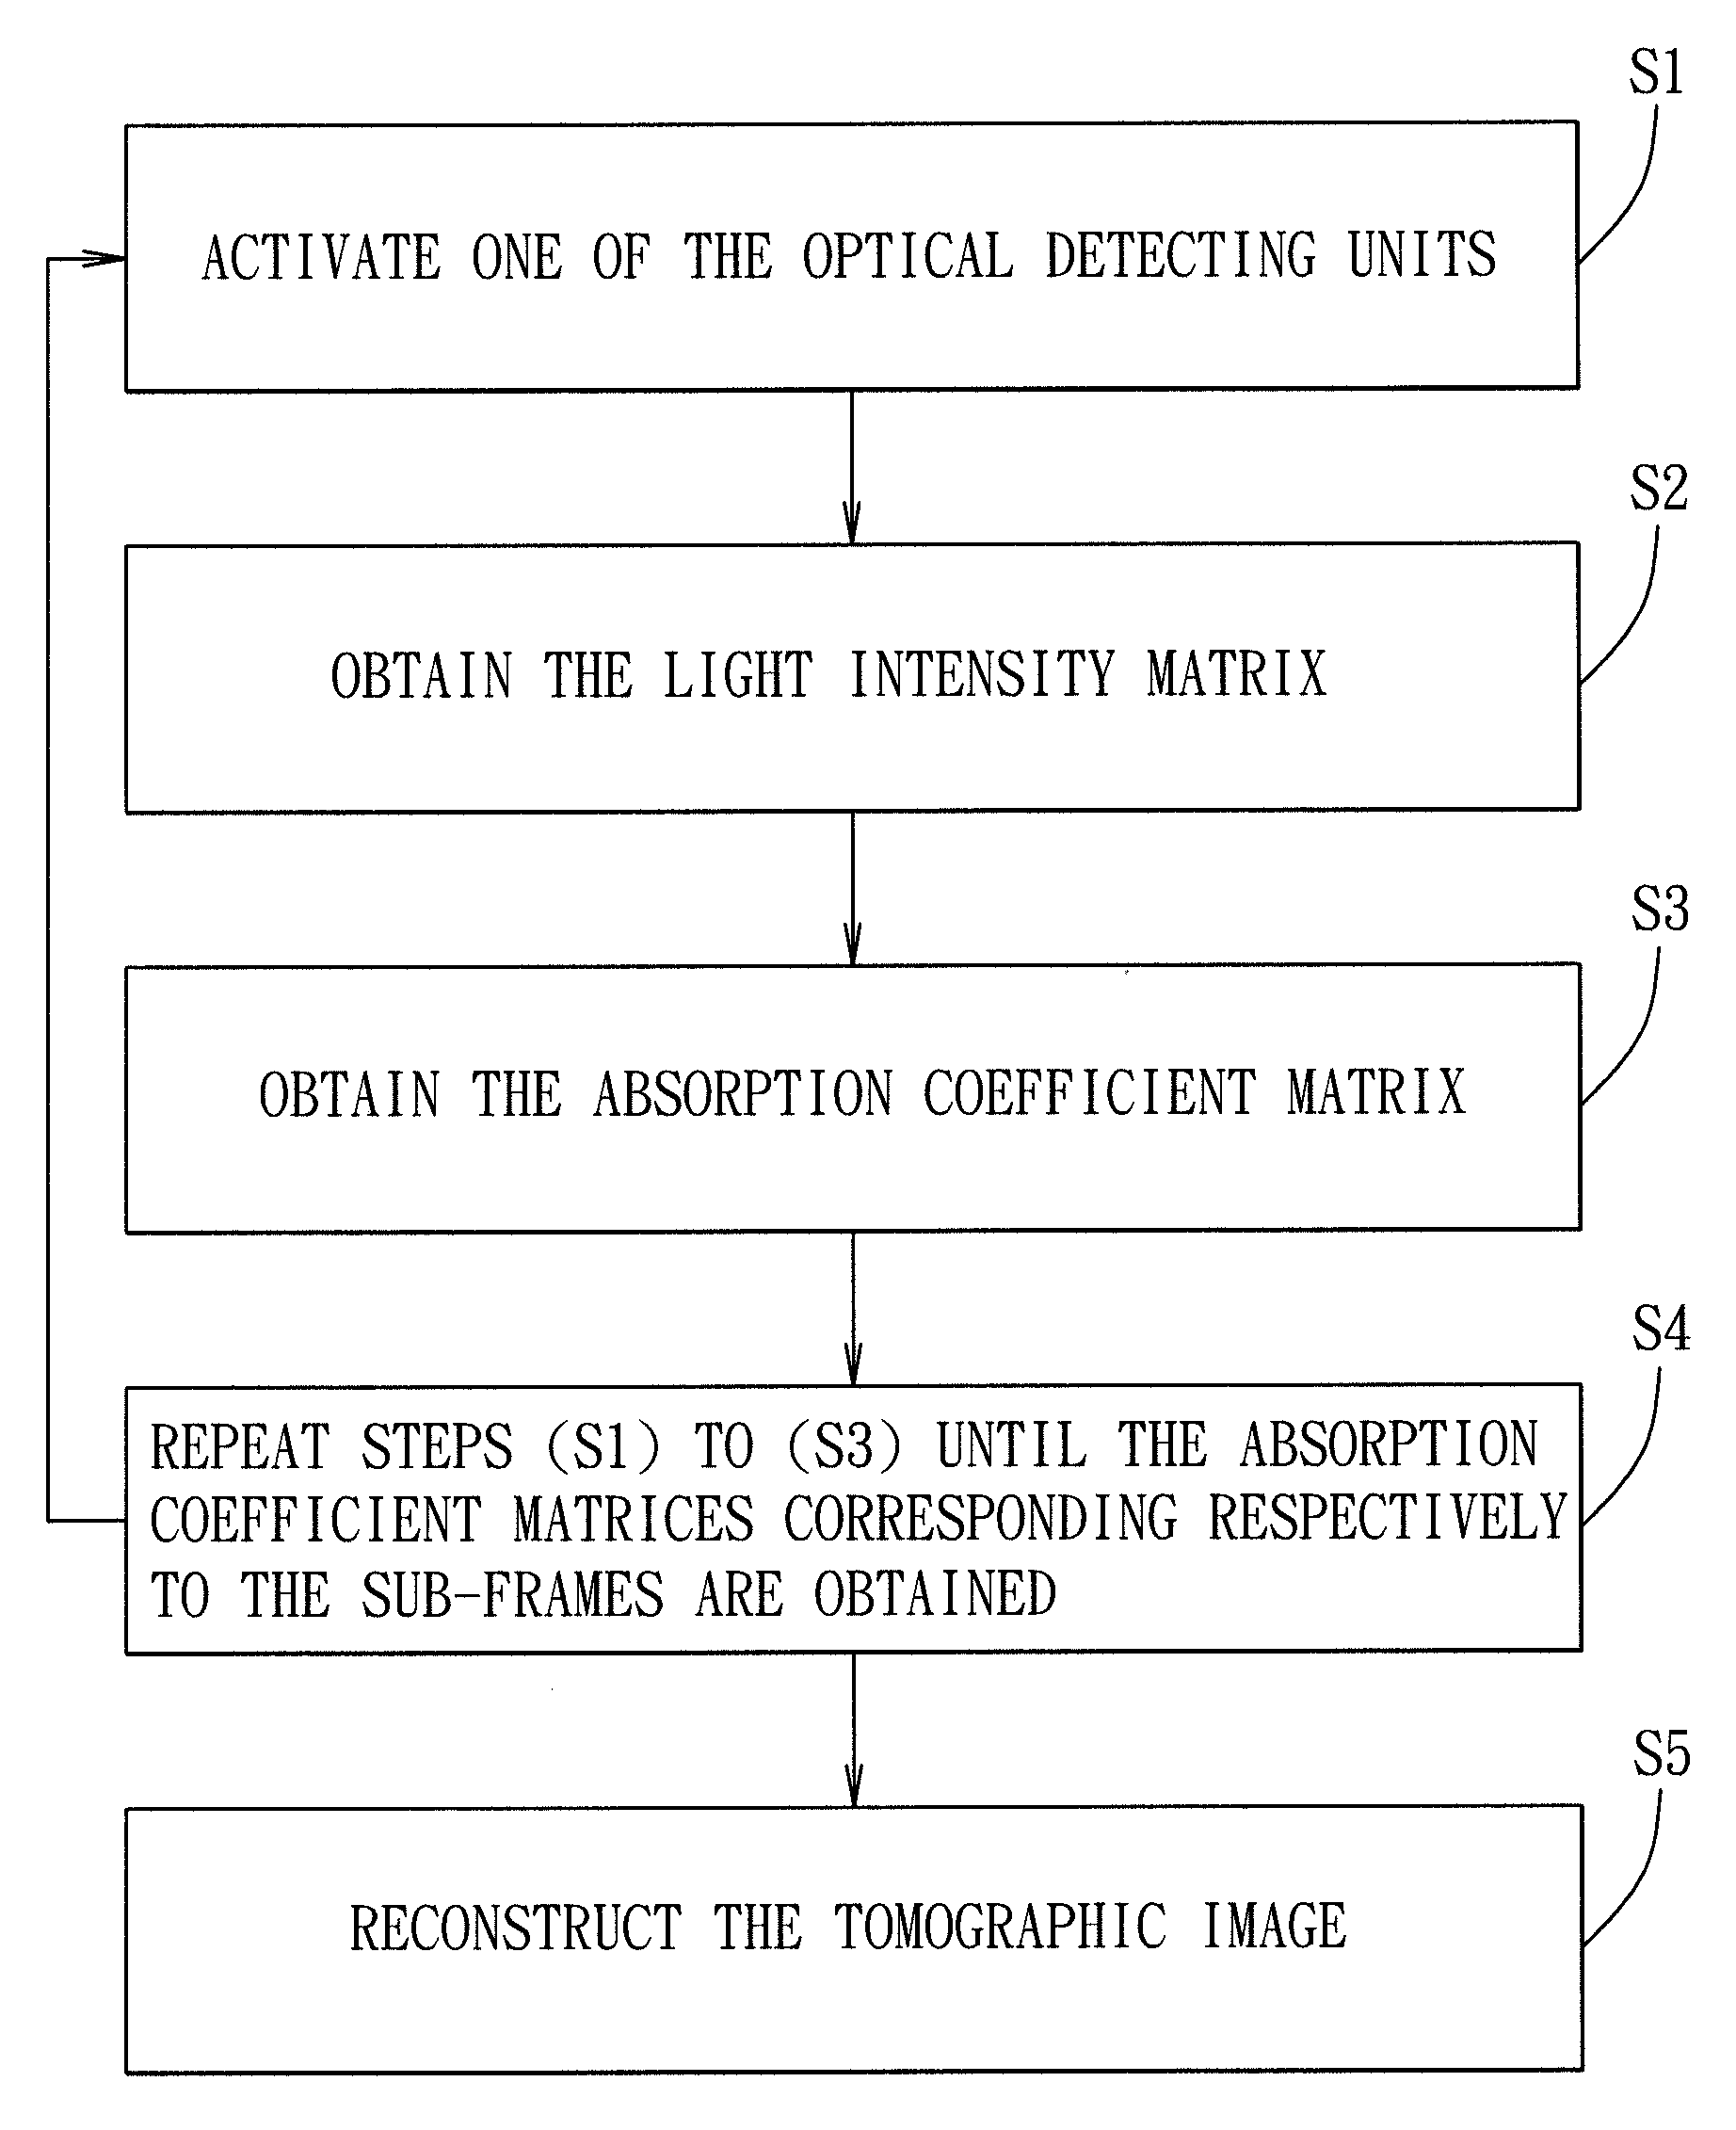 Image reconstruction method for diffuse optical tomography, diffuse optical tomography system, and computer program product